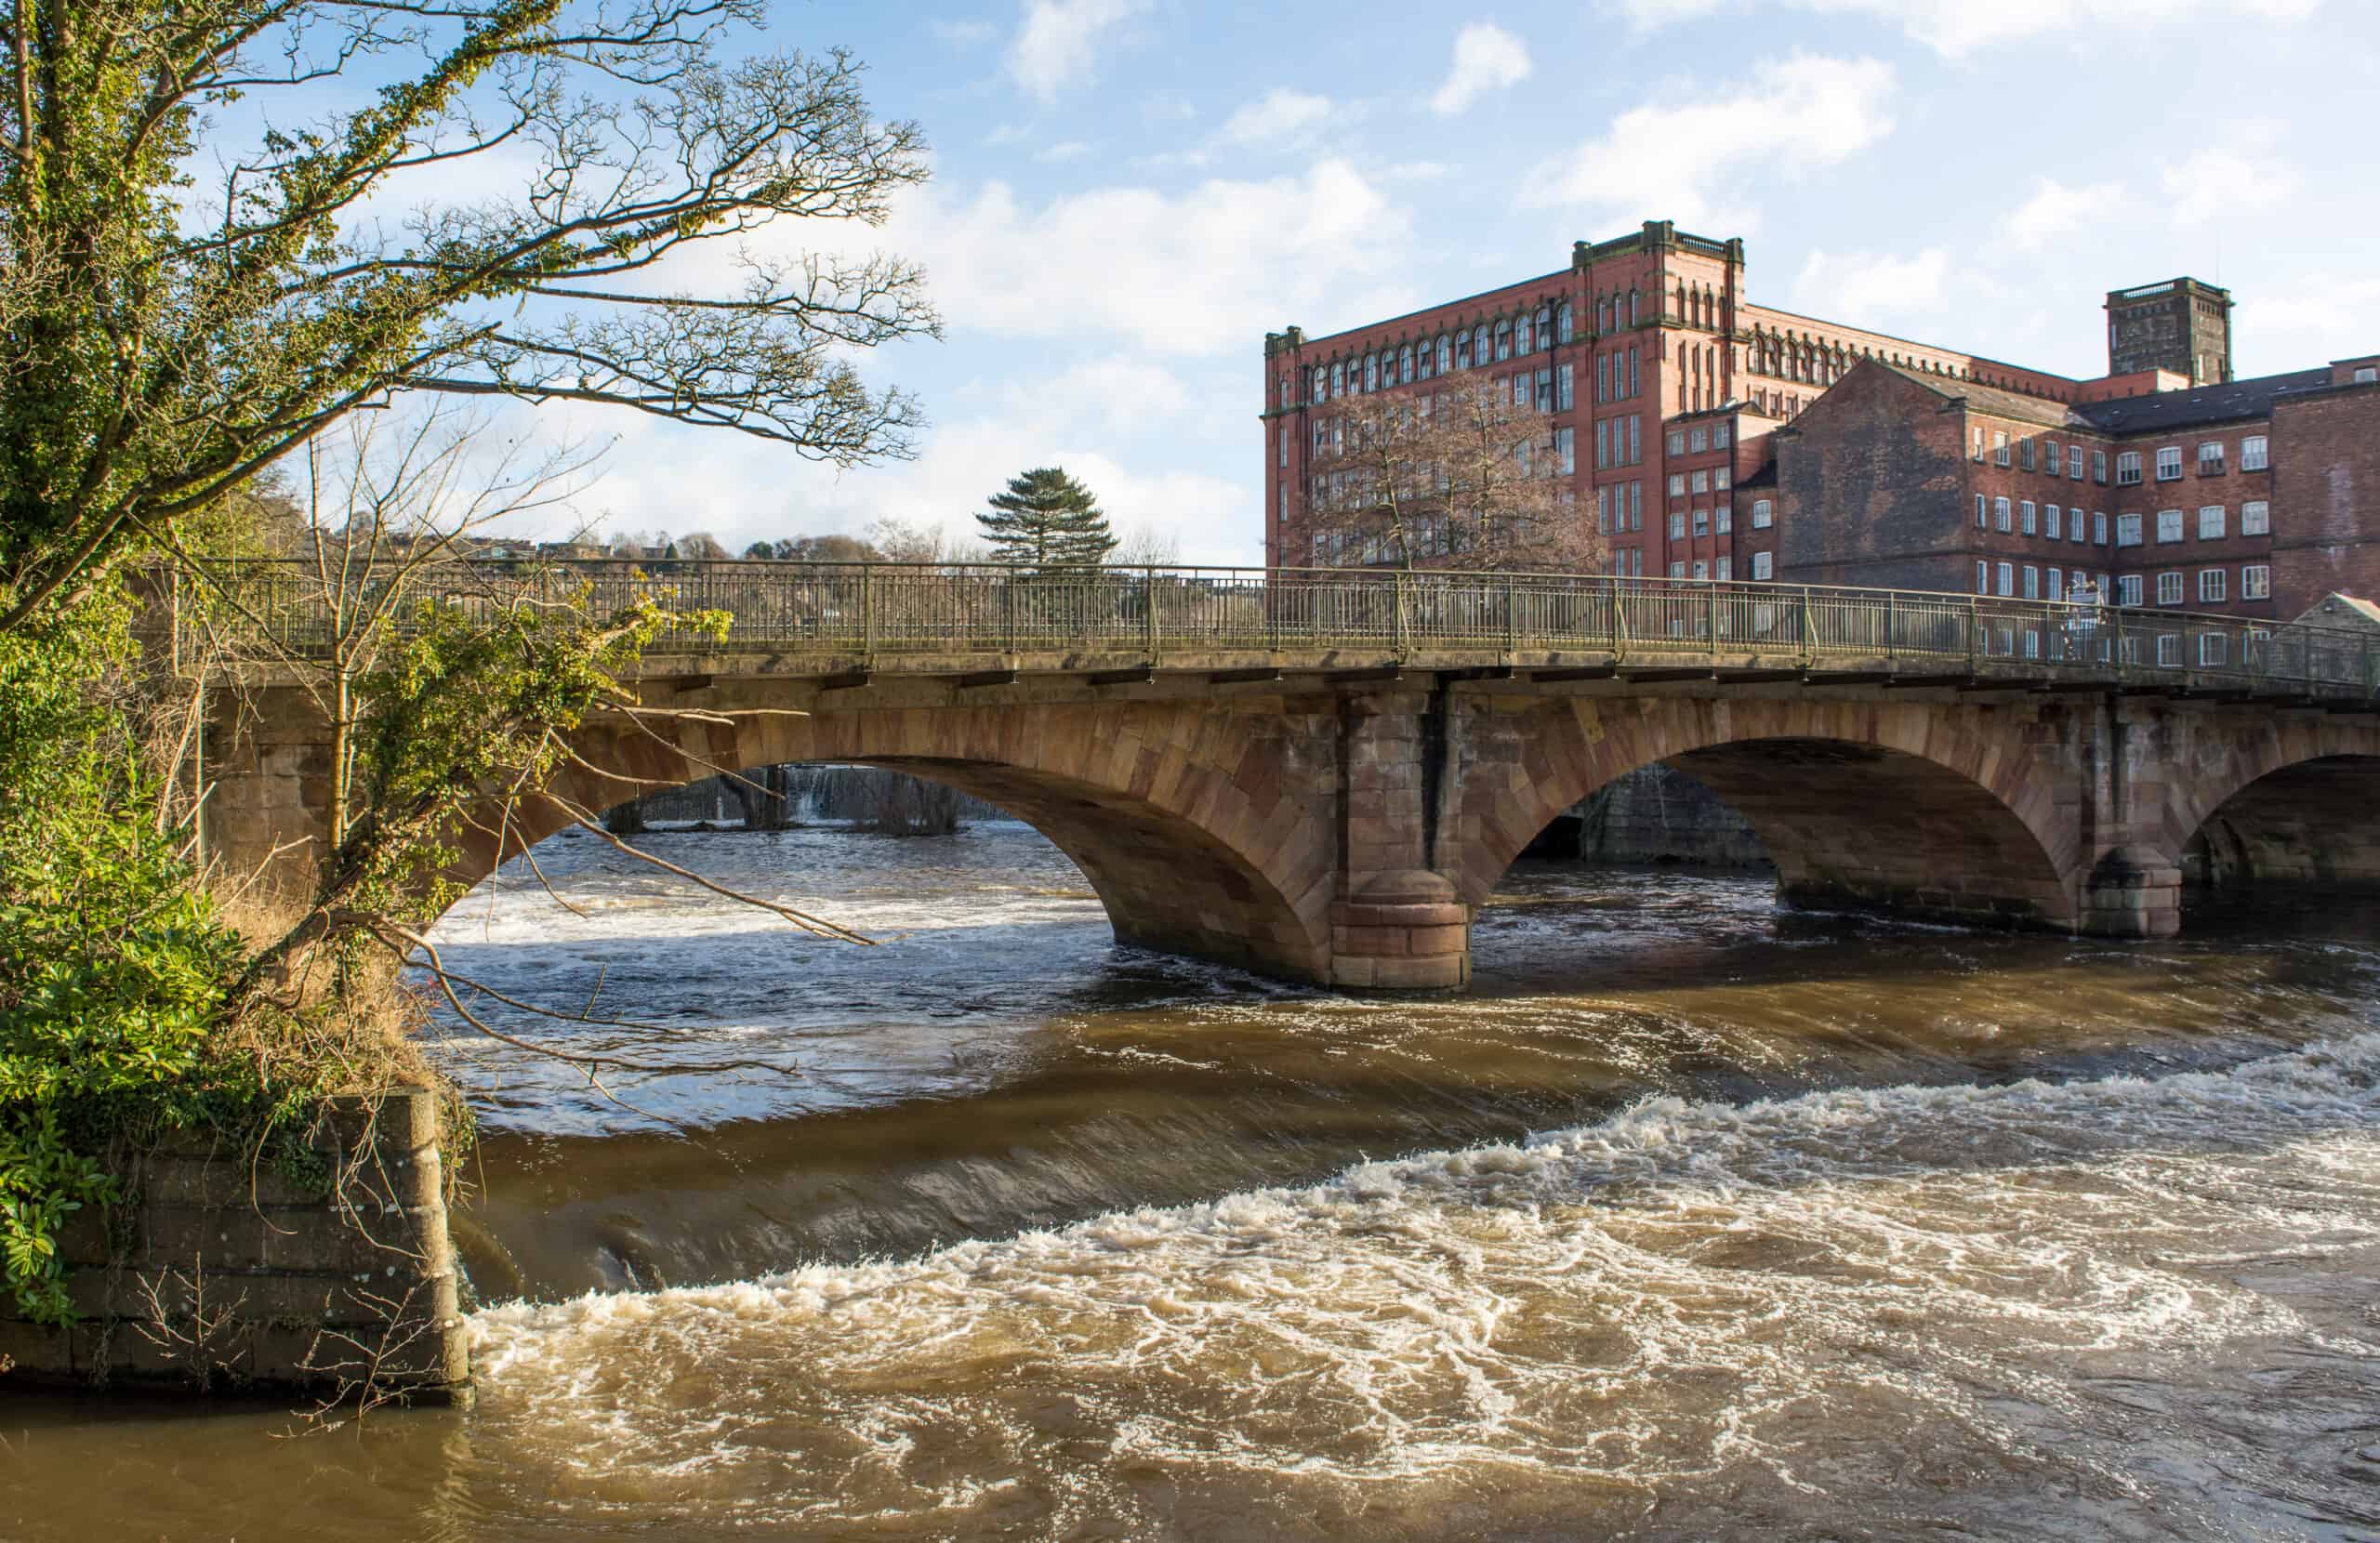 Old Derbyshire bridge and mill building